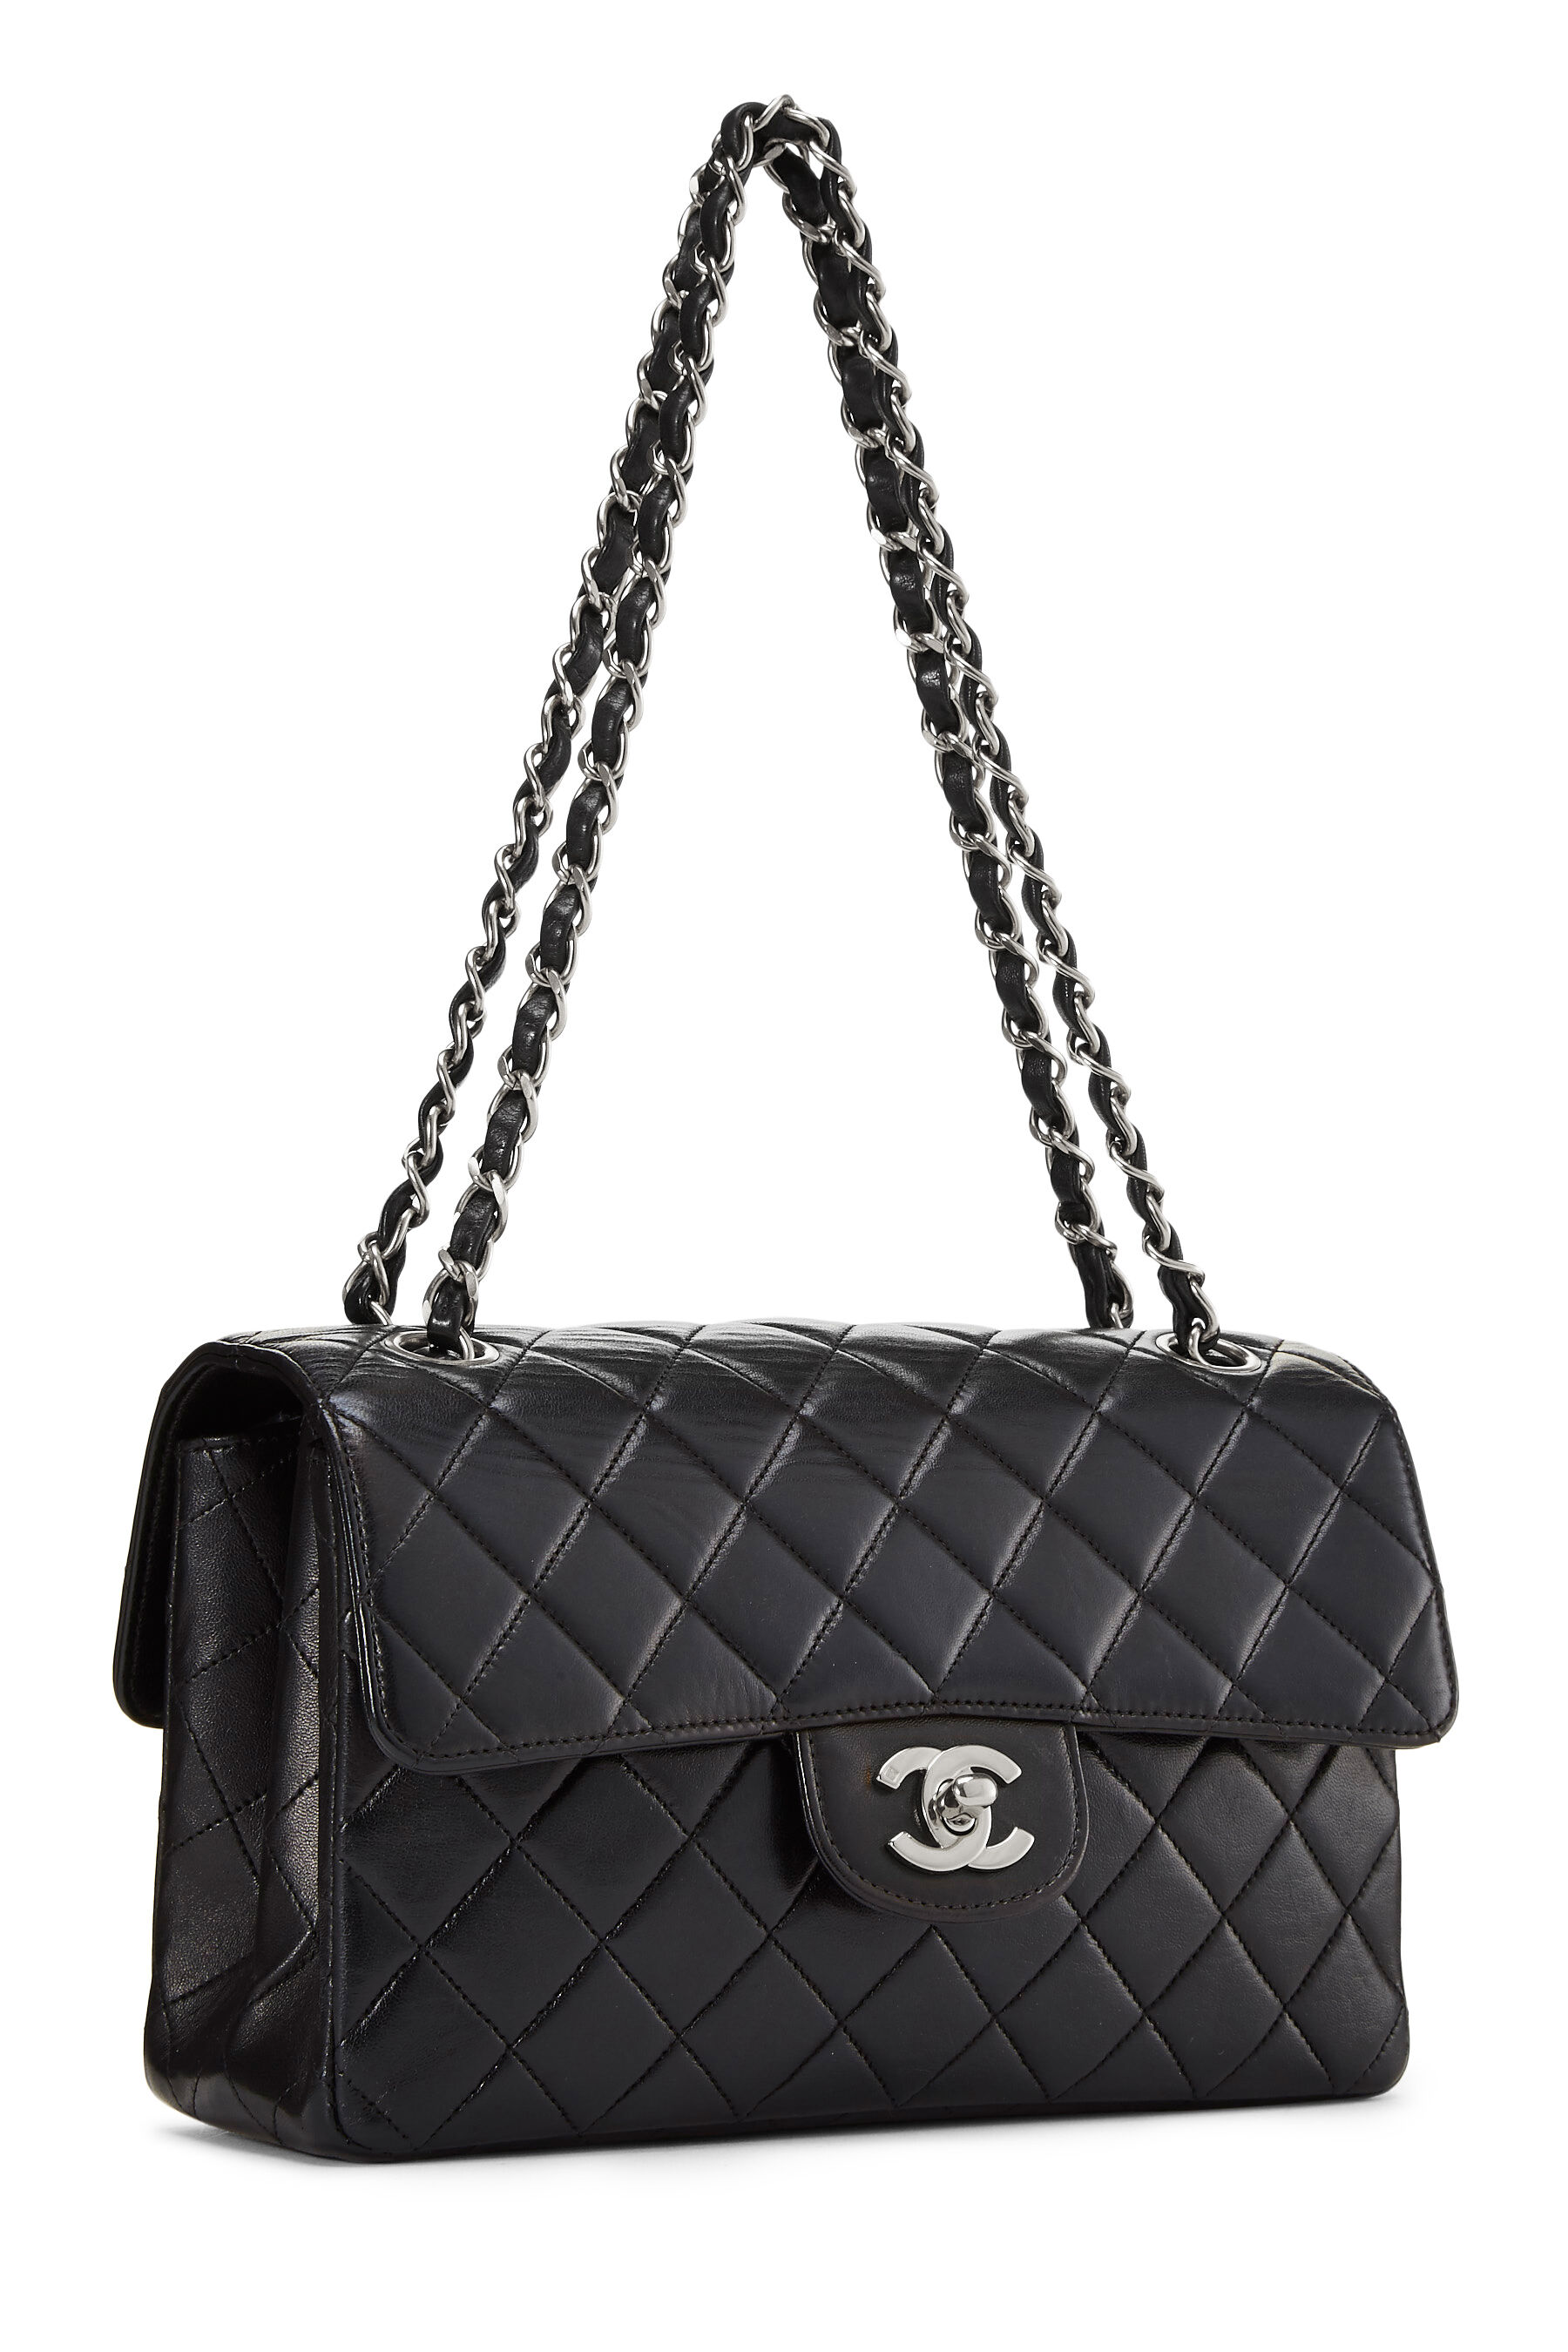 Chanel - Black Quilted Lambskin Double Sided Flap Small